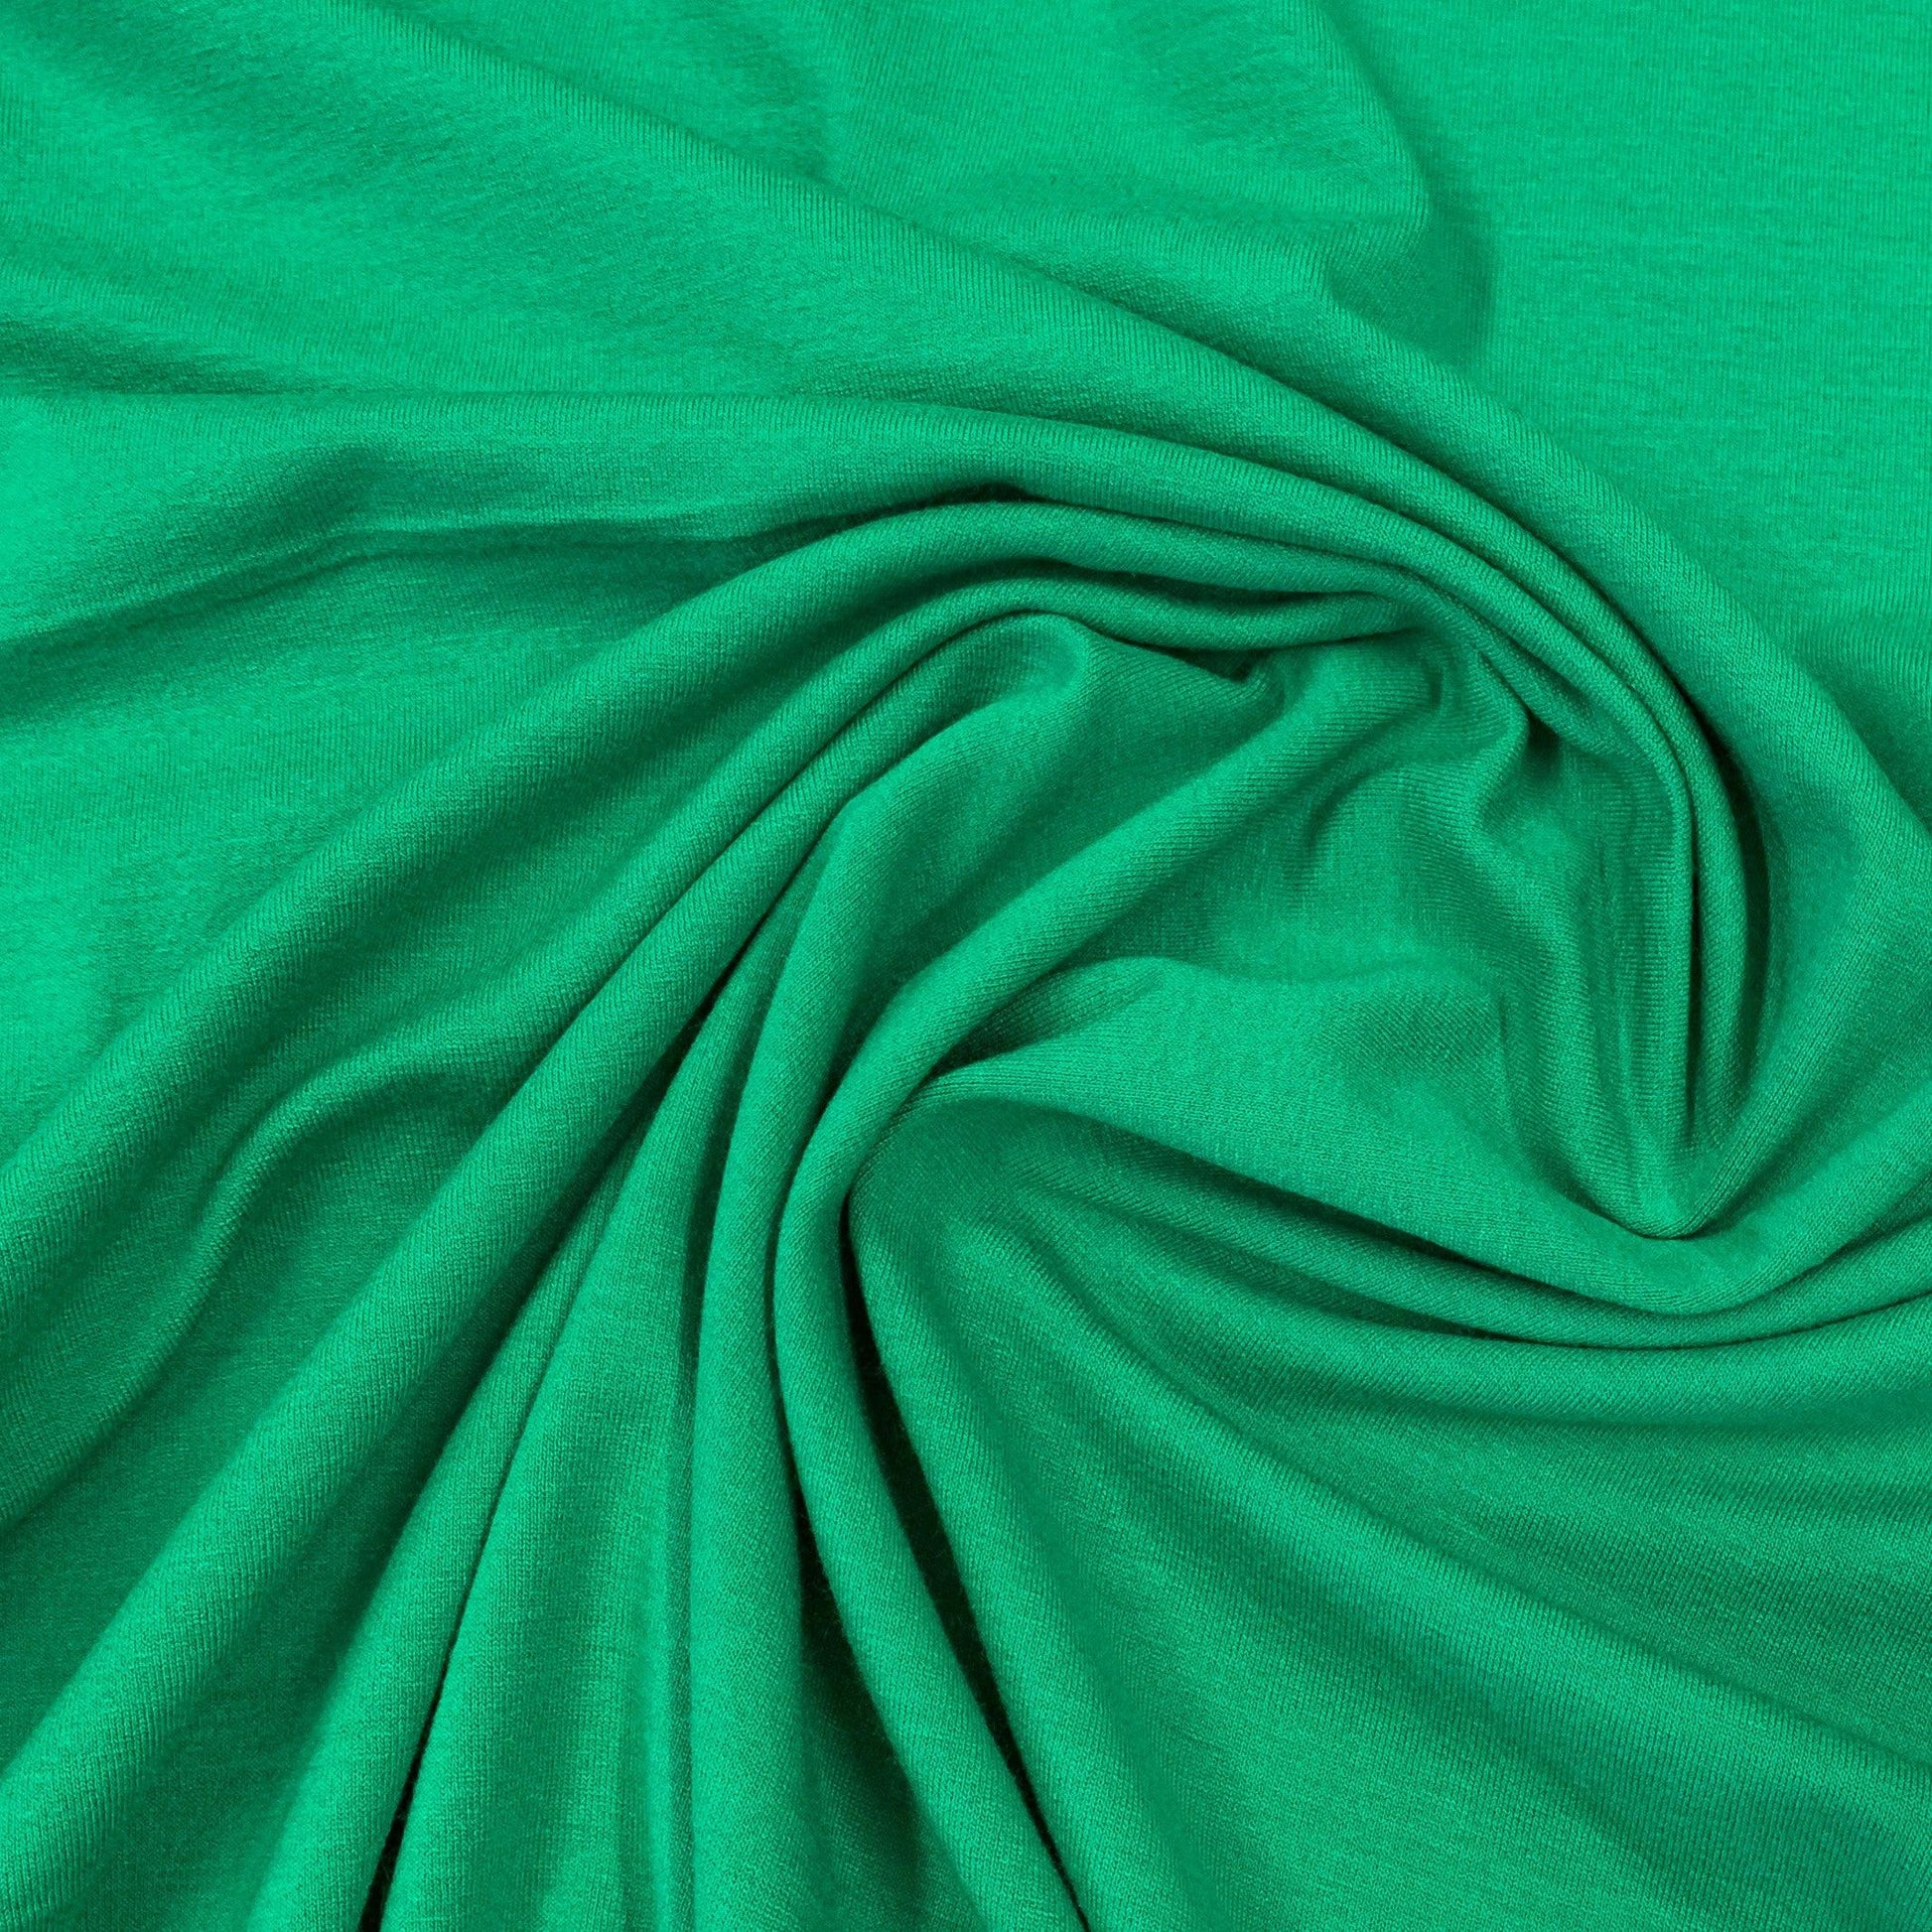 Rayon vs. Spandex: What is Difference between Rayon and Spandex?